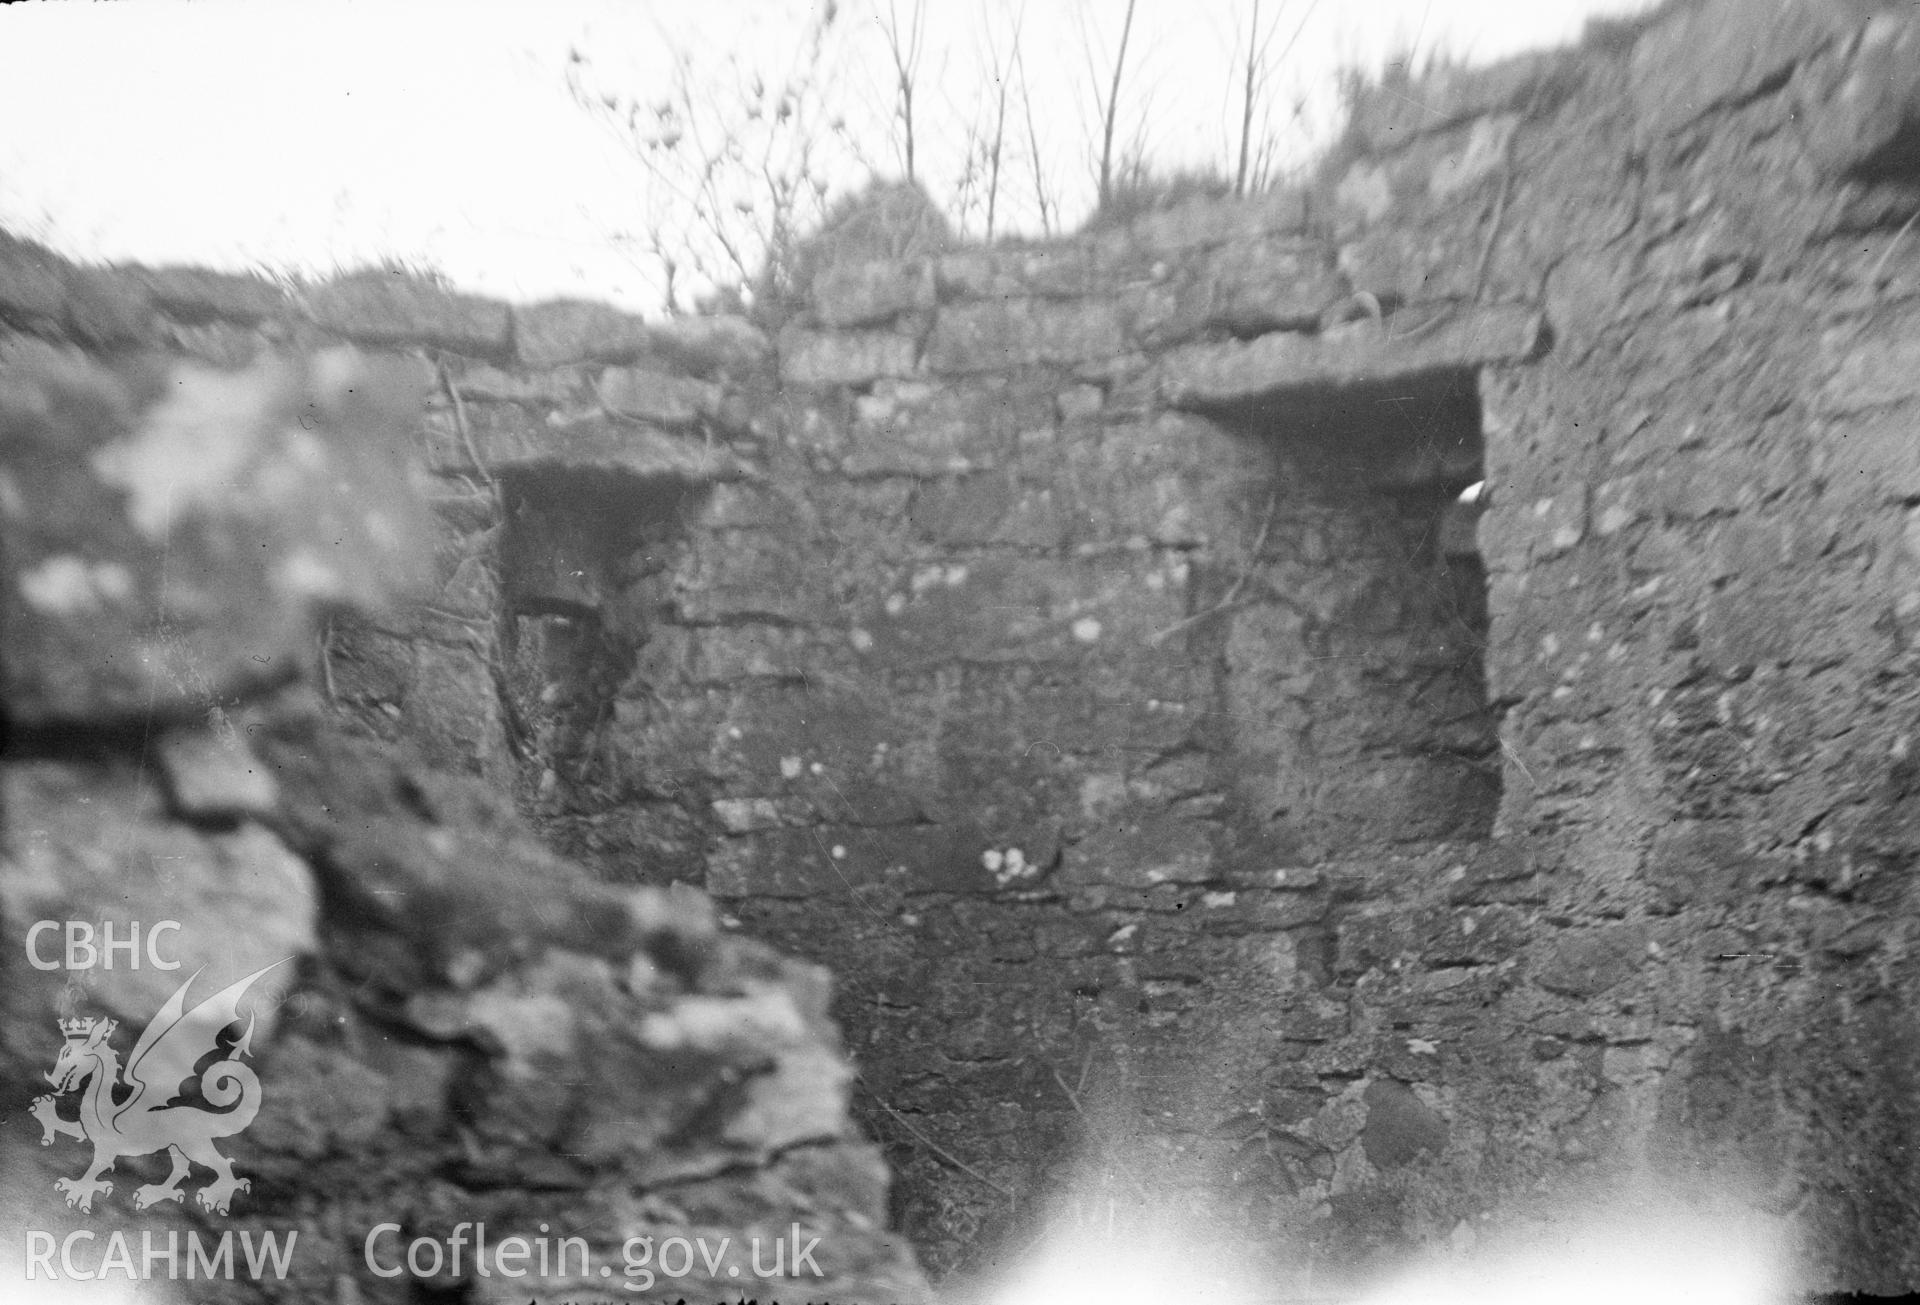 Digital copy of a nitrate negative showing Aber Lleiniog Castle. From Cadw Monuments in Care Collection.